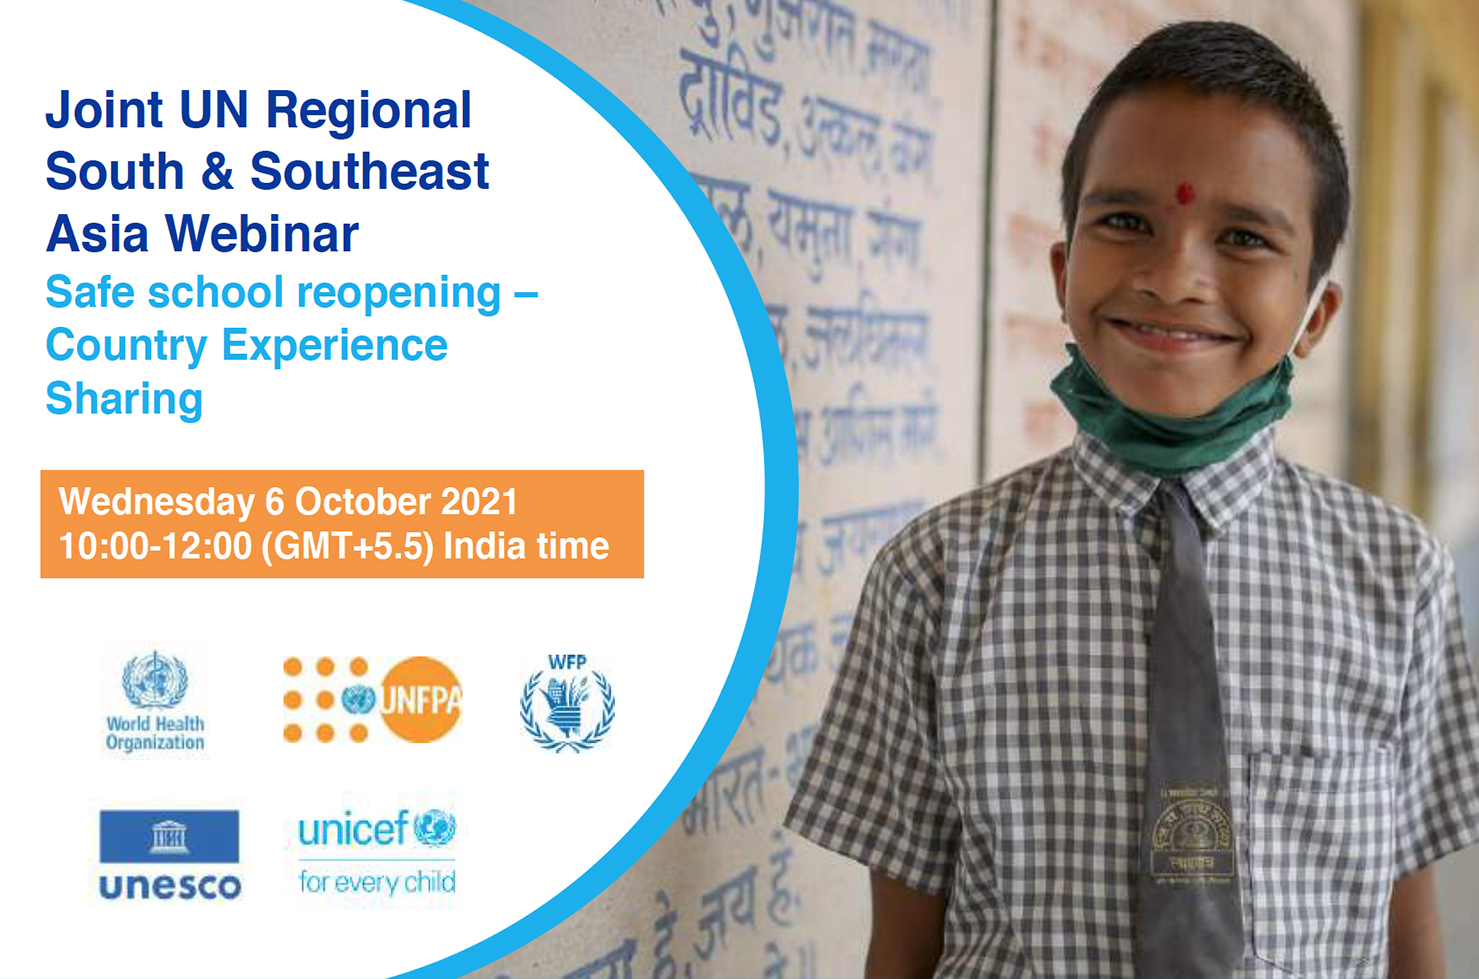 Joint UN Regional South & Southeast Asia Webinar on Safe School Reopening - Country Experience Sharing